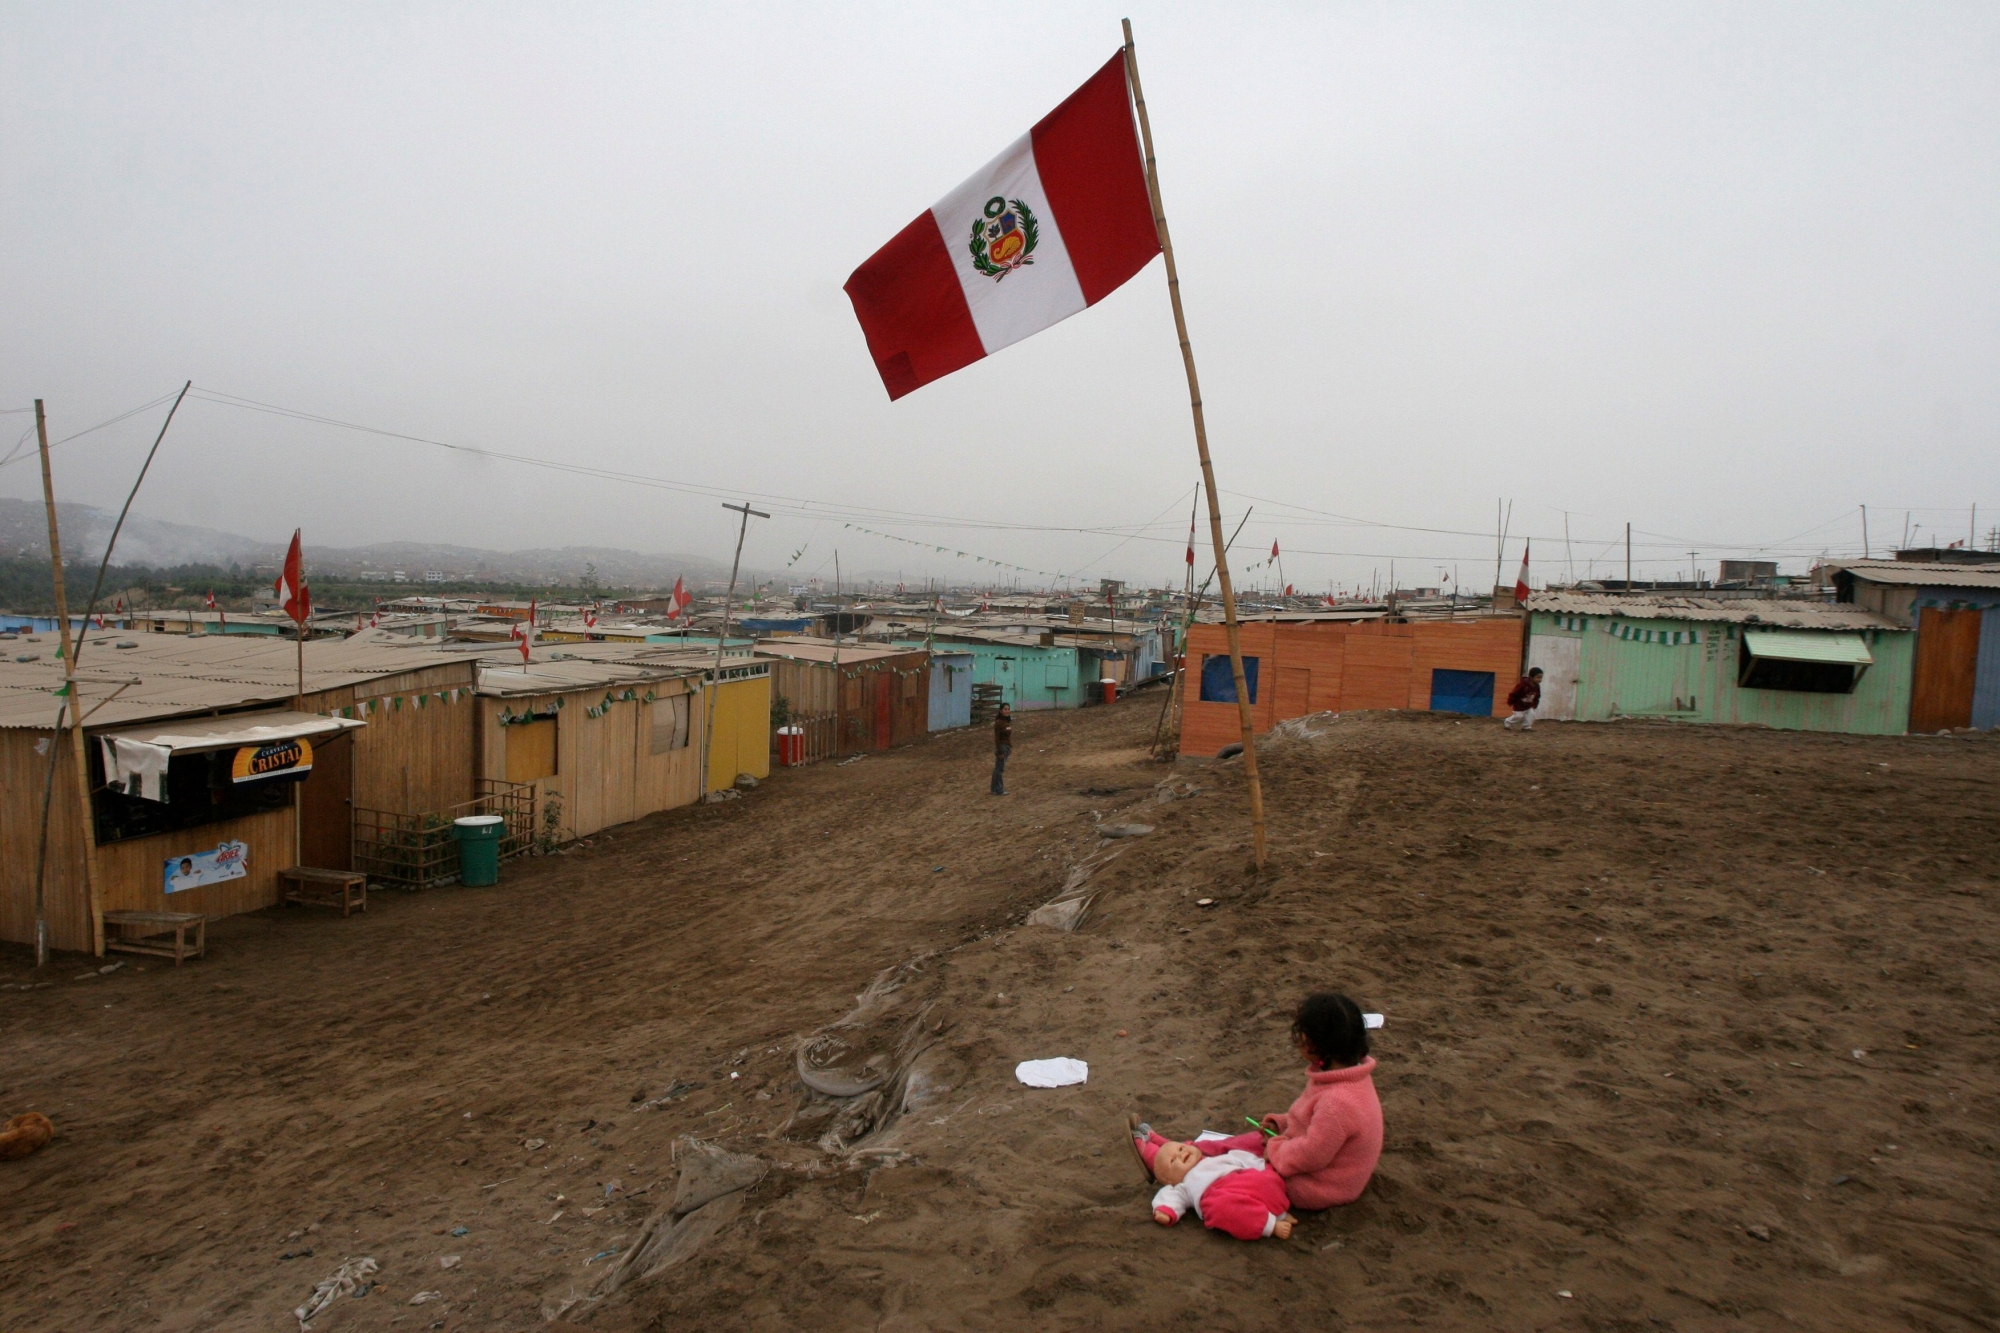 A girl sits with her doll next to a flag of Peru in a poor neighborhood in Lima, Thursday, May 15, 2008. Leaders from nearly 60 Latin America and European countries will attend a Friday summit in Peru to discuss climate change, trade, poverty and the global food crisis. (KEYSTONE/AP Photo/Esteban Felix) PERU LATAM EU SUMMIT